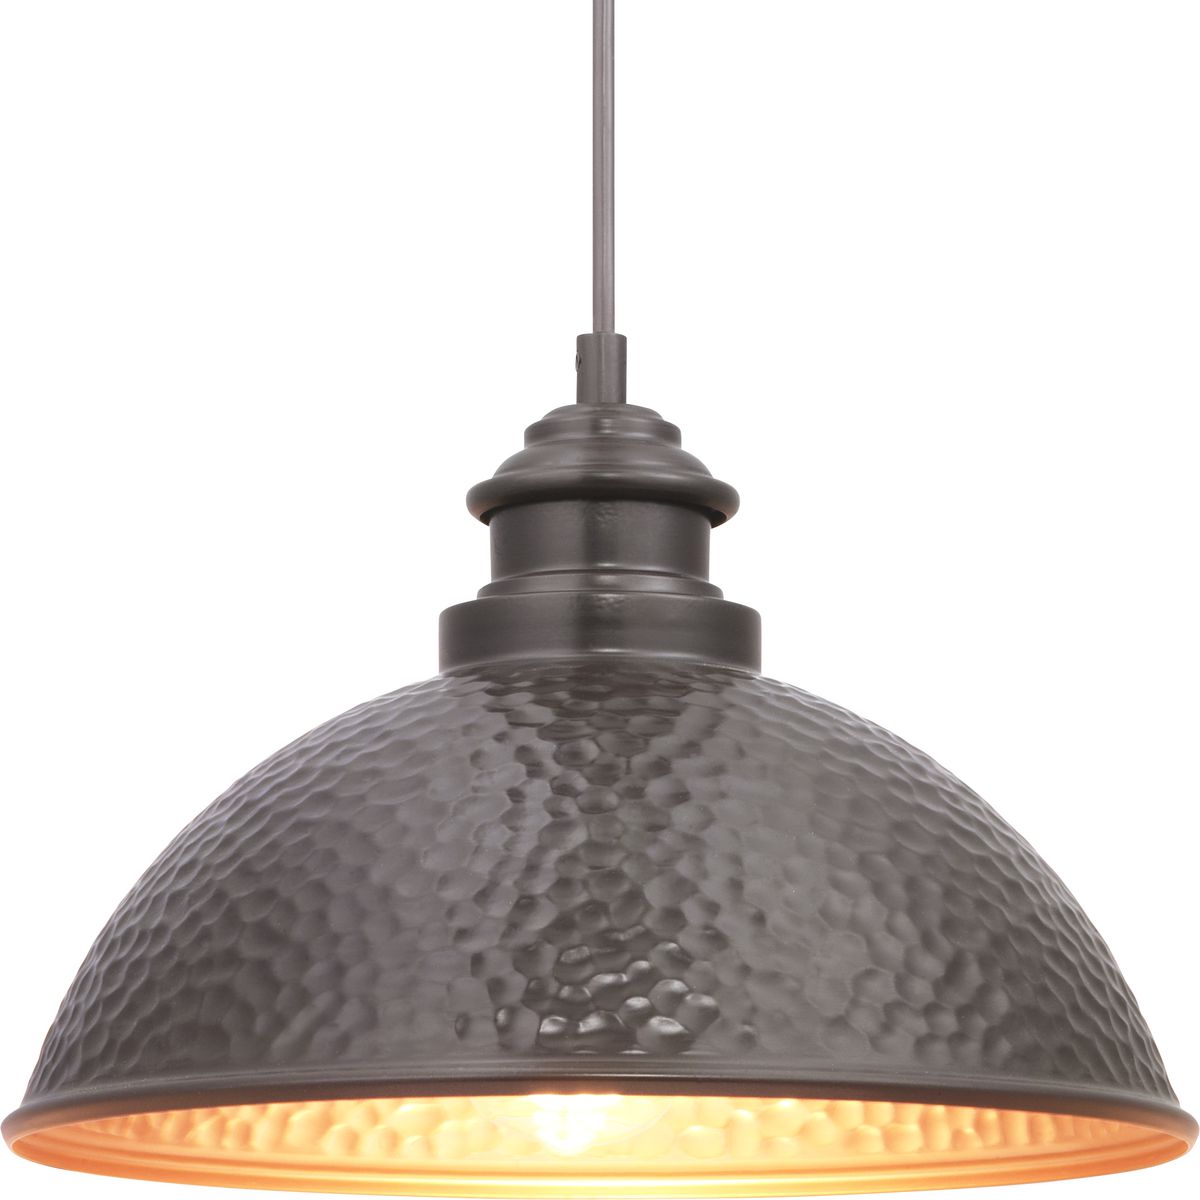 Englewood Collection One-Light Hanging Lantern - Damp Location Listed - Model P550032-020